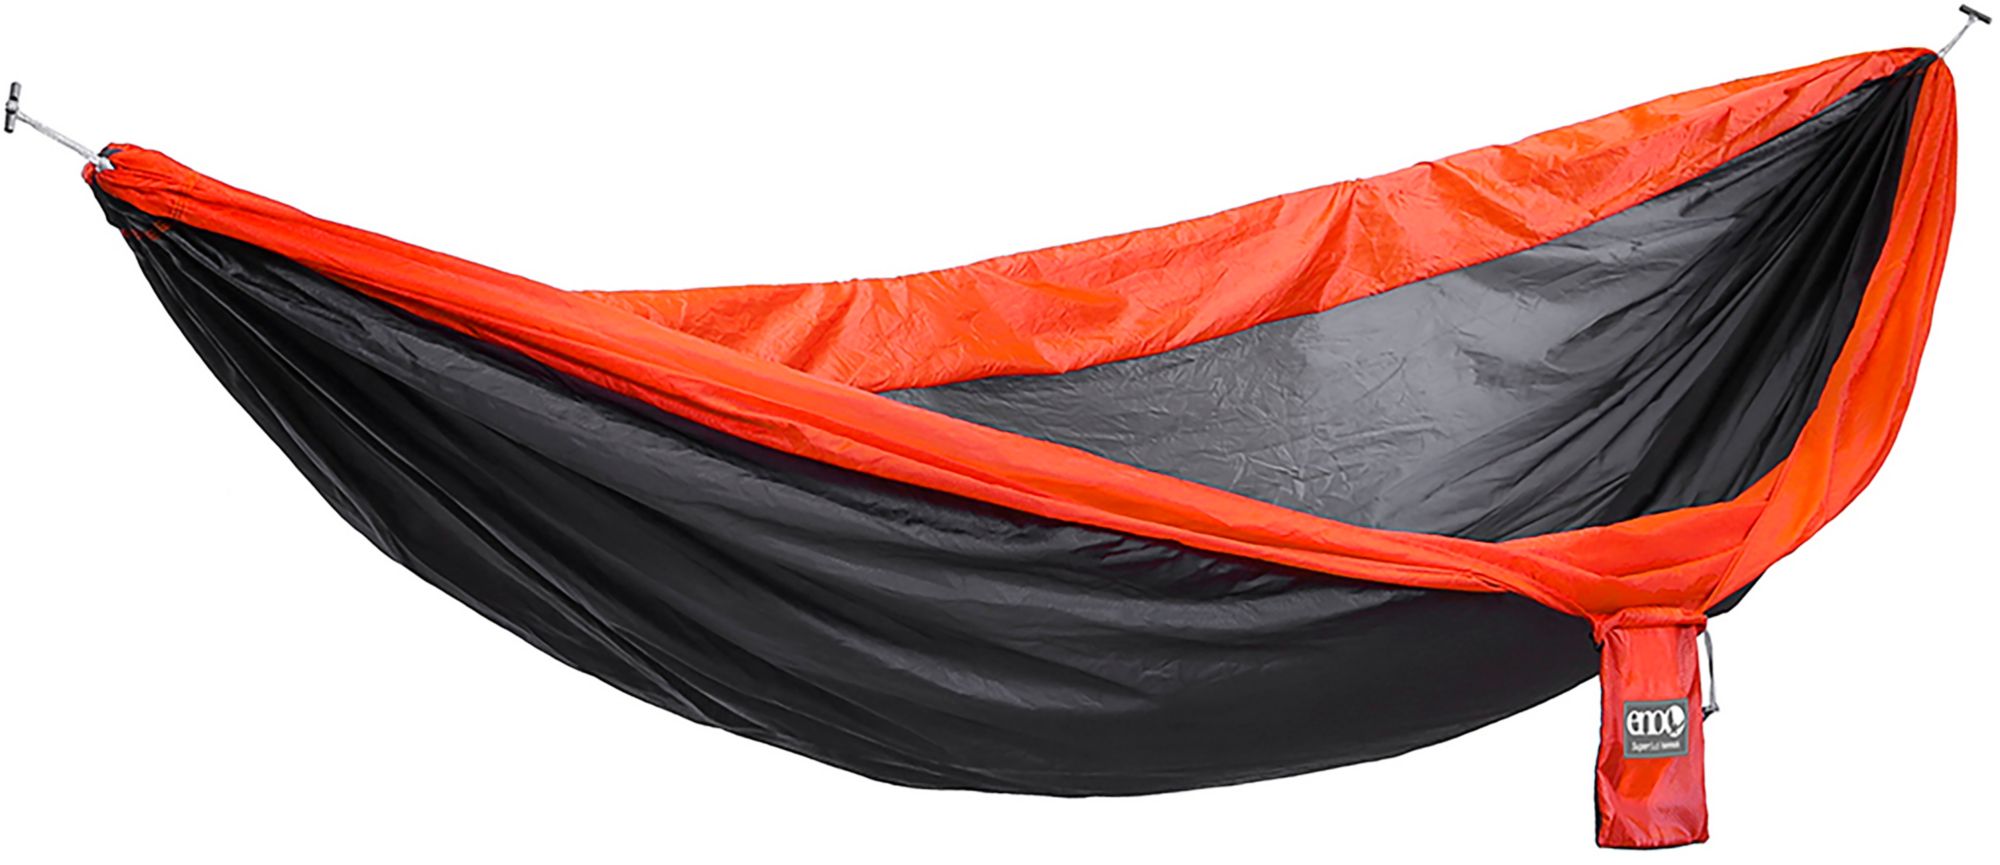 Photos - Other ENO Eagles Nest Outfitters SuperSub Ultralight Hammock, Charcoal/Orange 21ENOU 